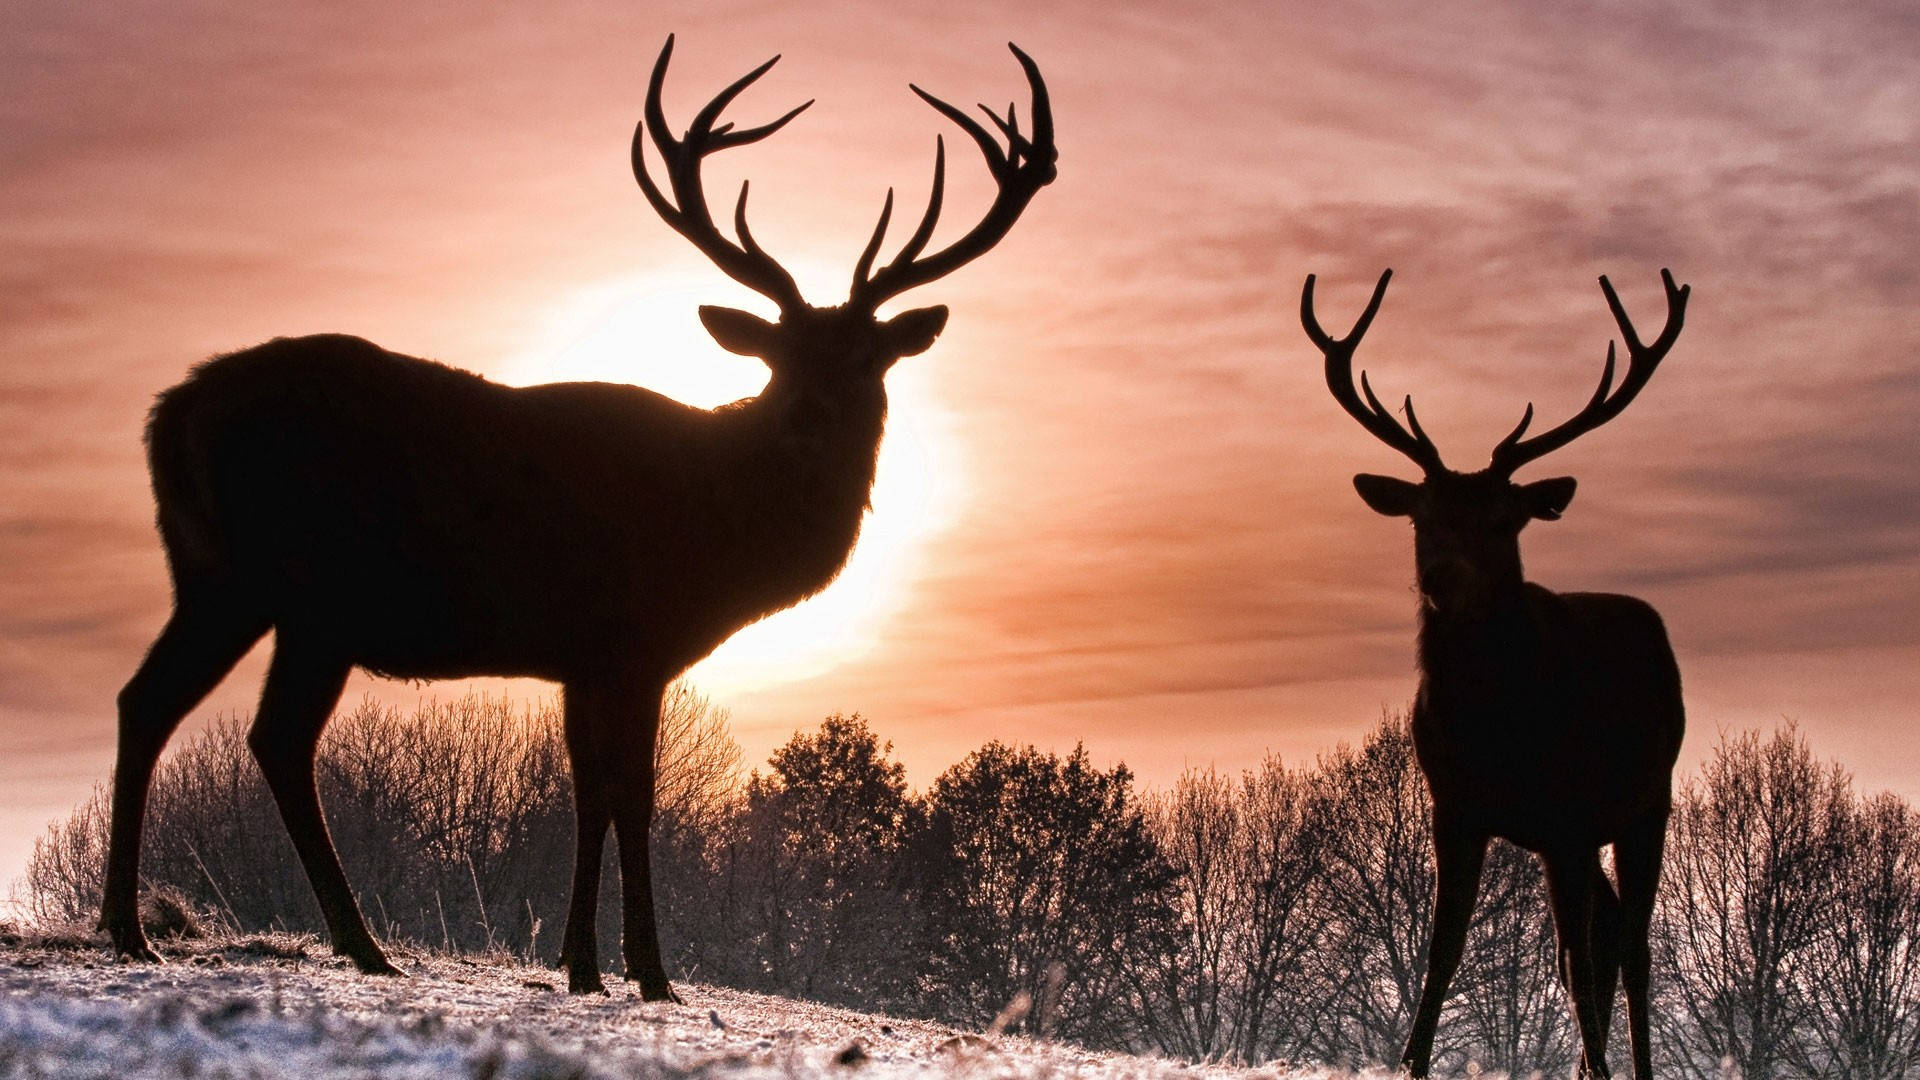 Sunset And Reindeer Background